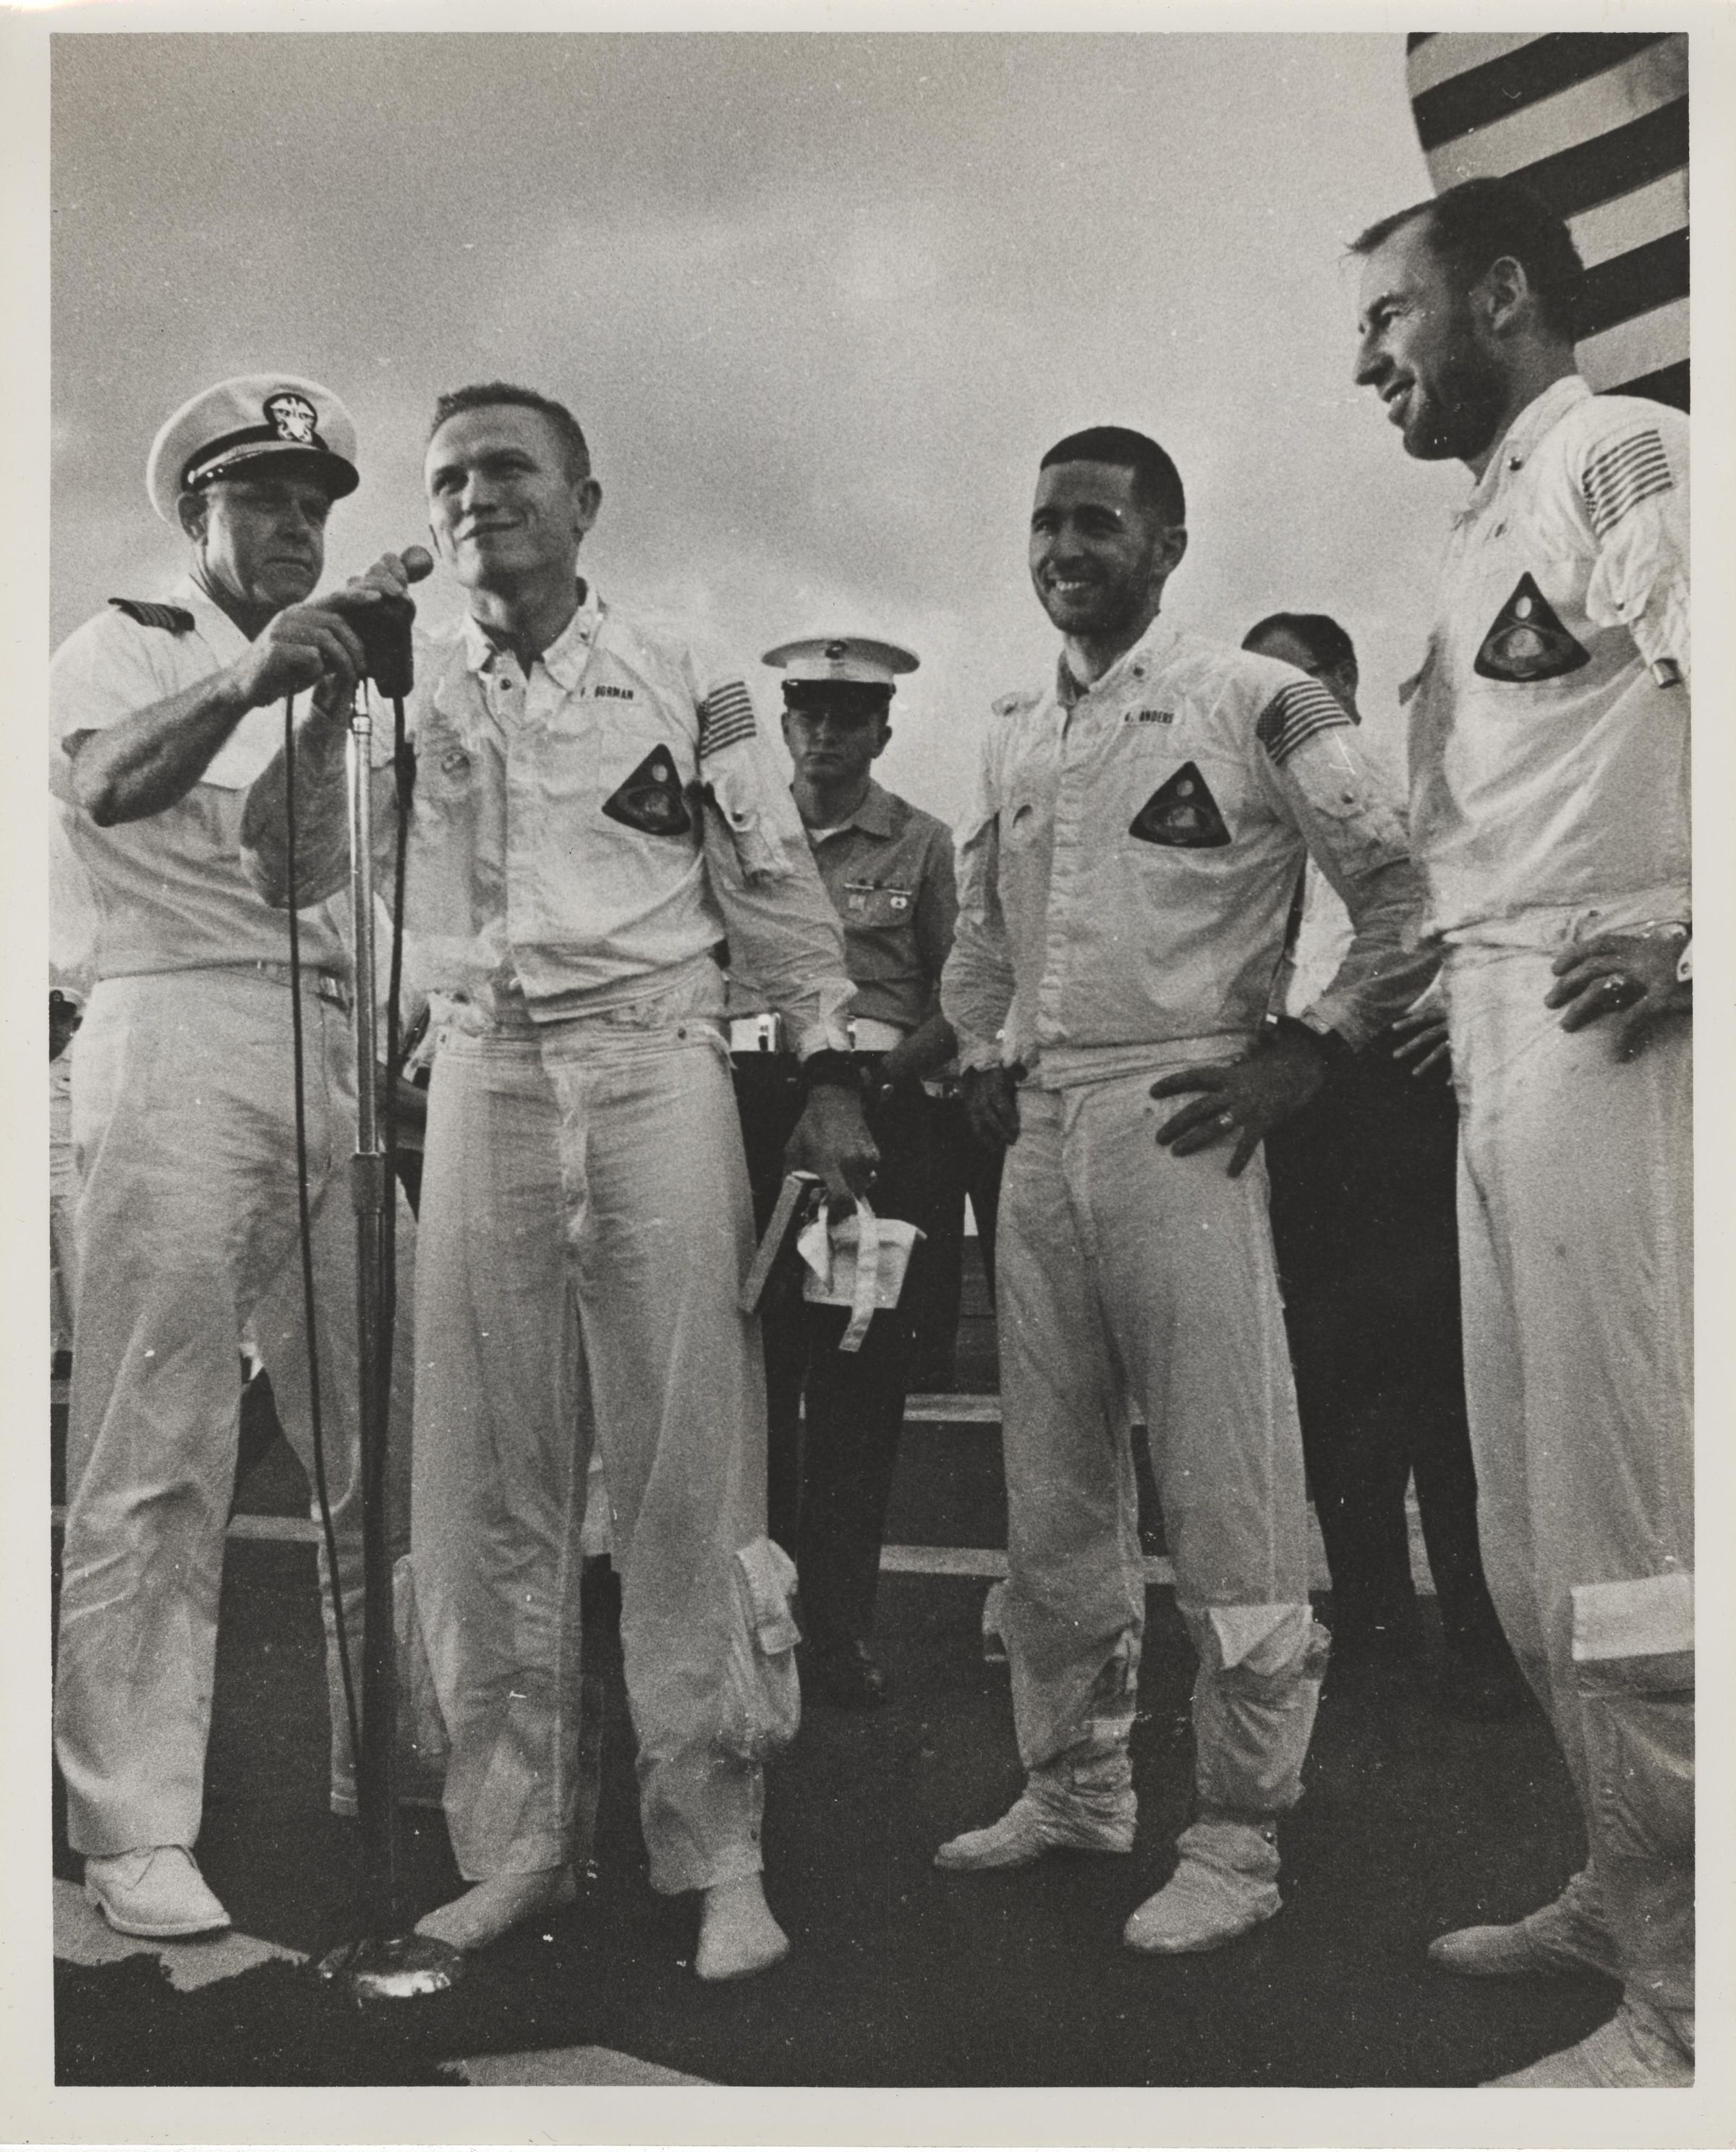 Primary Image of The Crew of Apollo 8 Address The Yorktown Following Their Successful Mission